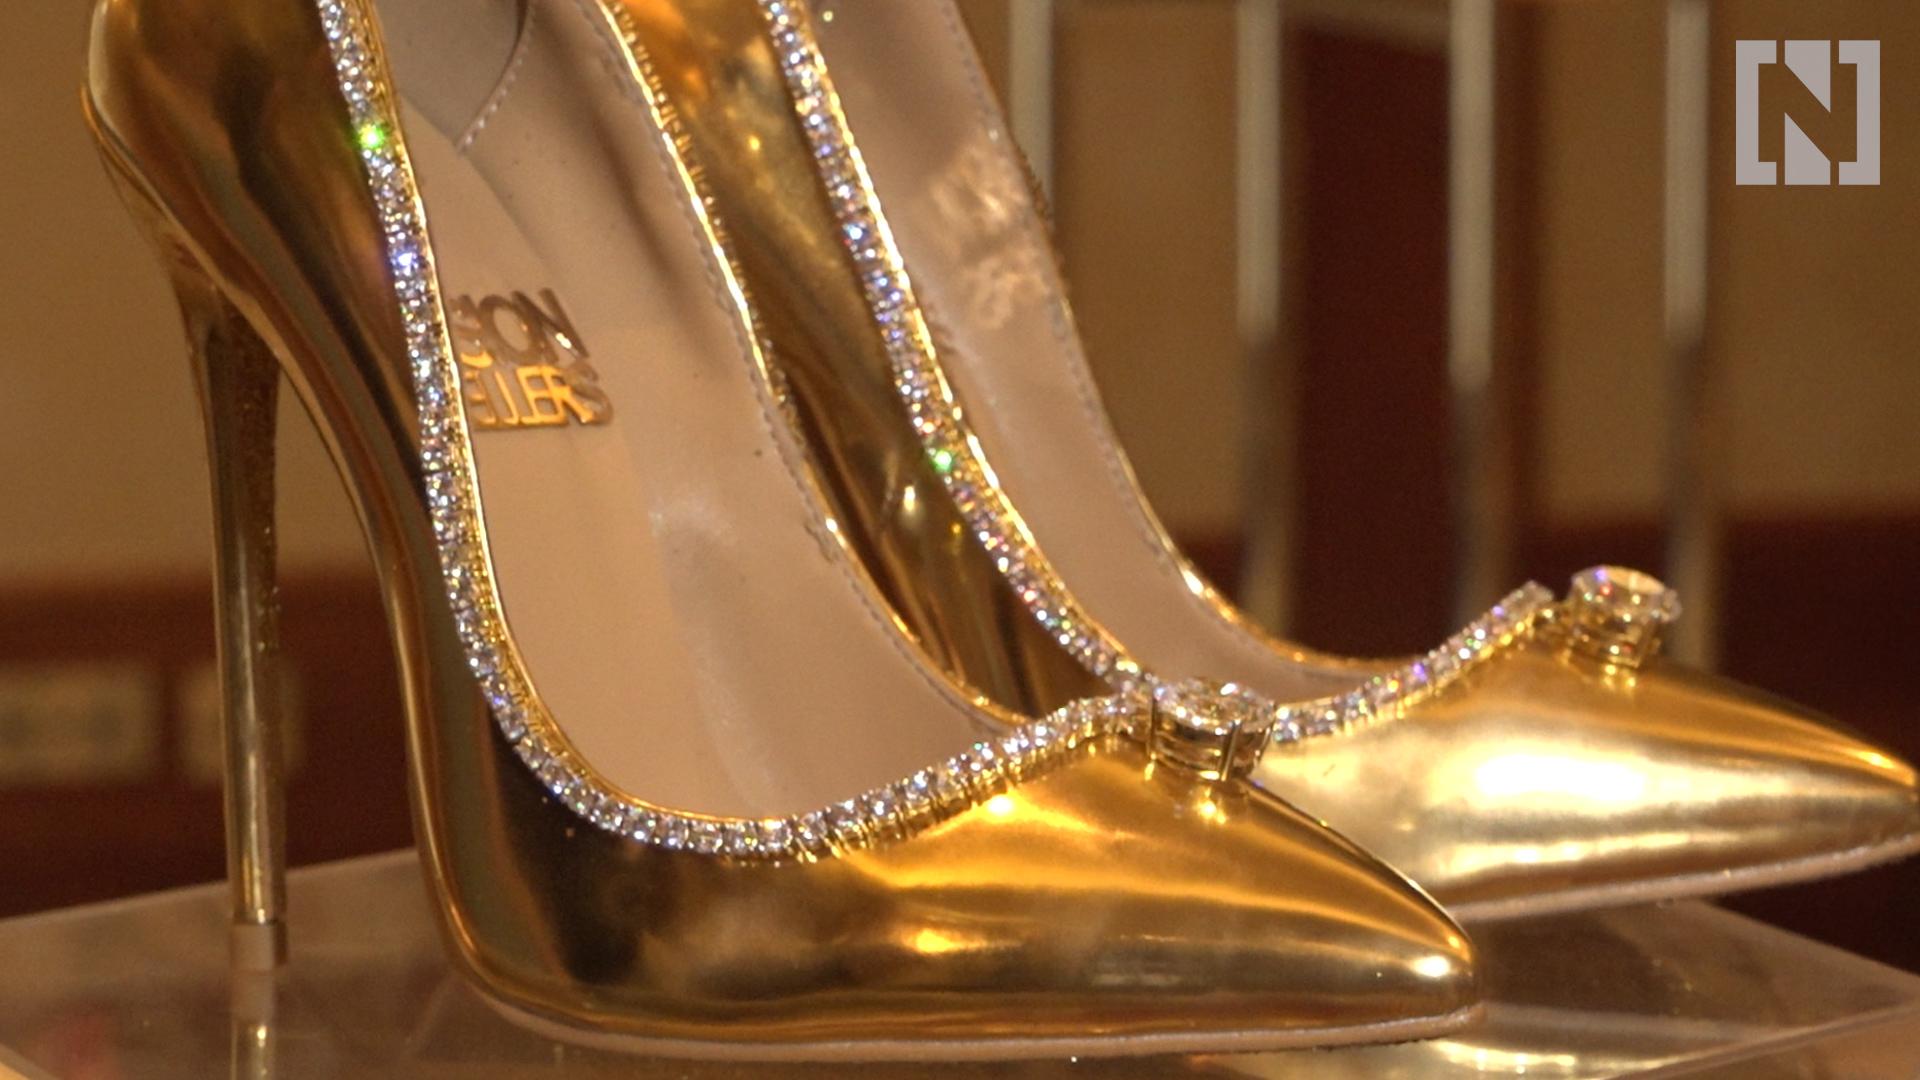 The world's most expensive shoes unveiled in Dubai. What is the cost?